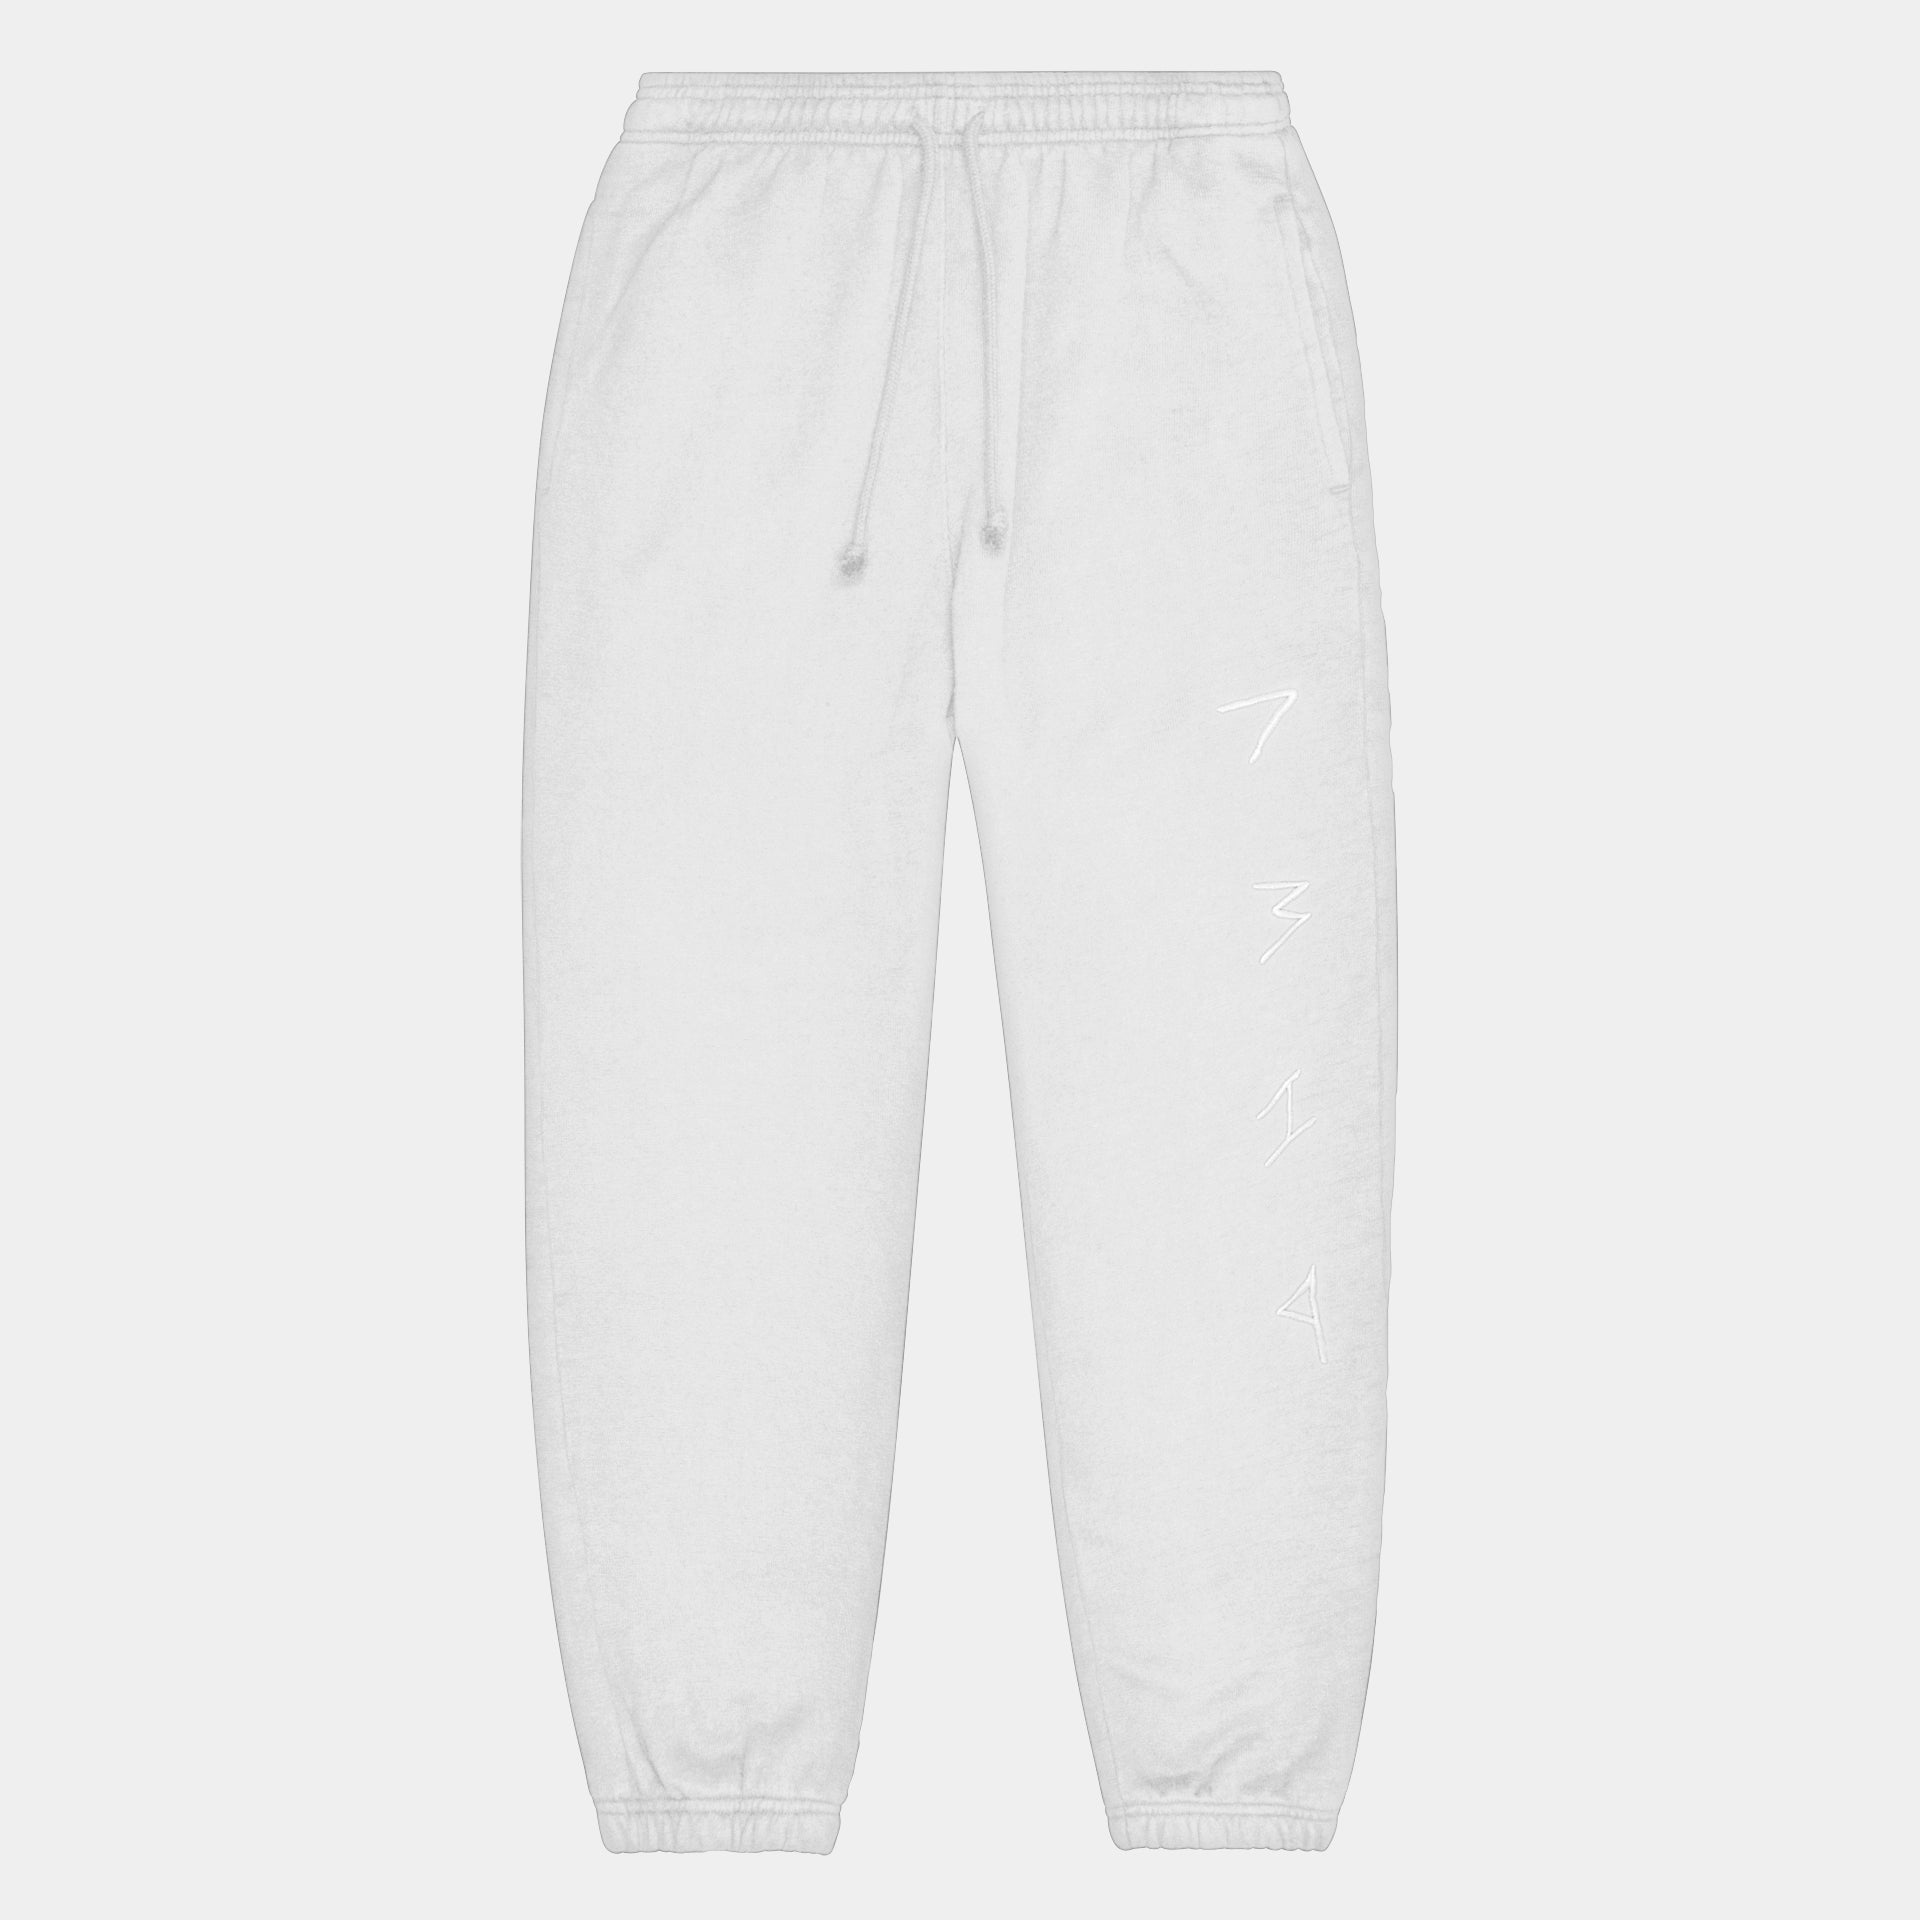 Cotton Sweat Pants CUFFED AT ANKLE Unisex Cotton Sweat Pants by